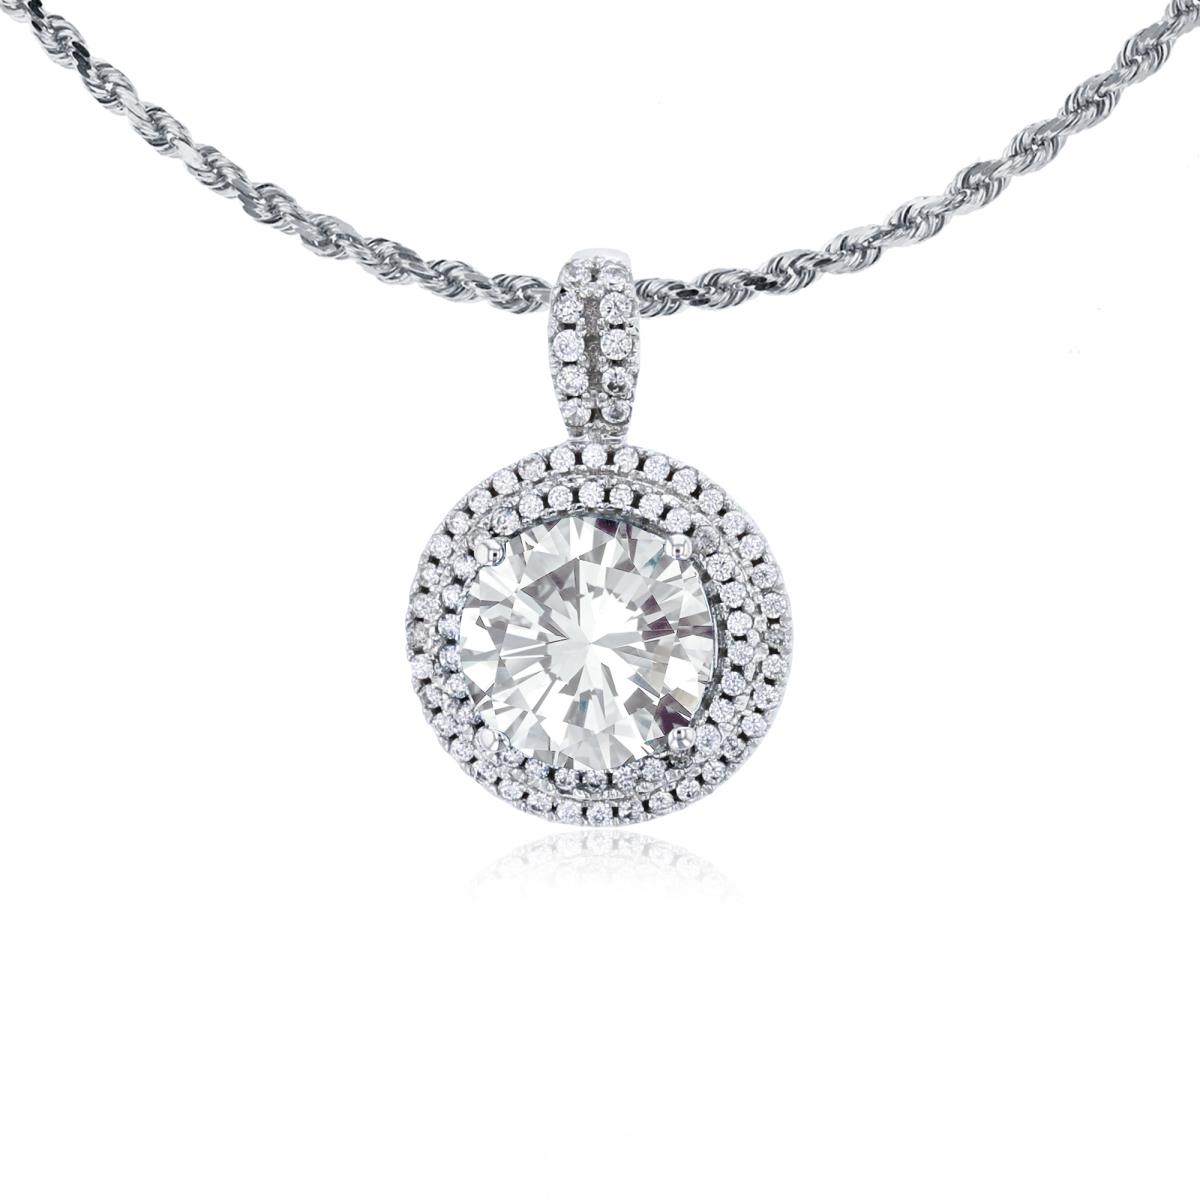 10K White Gold 7mm Round White Topaz & 0.25 CTTW Diamonds Double Halo 18" Rope Chain Necklace